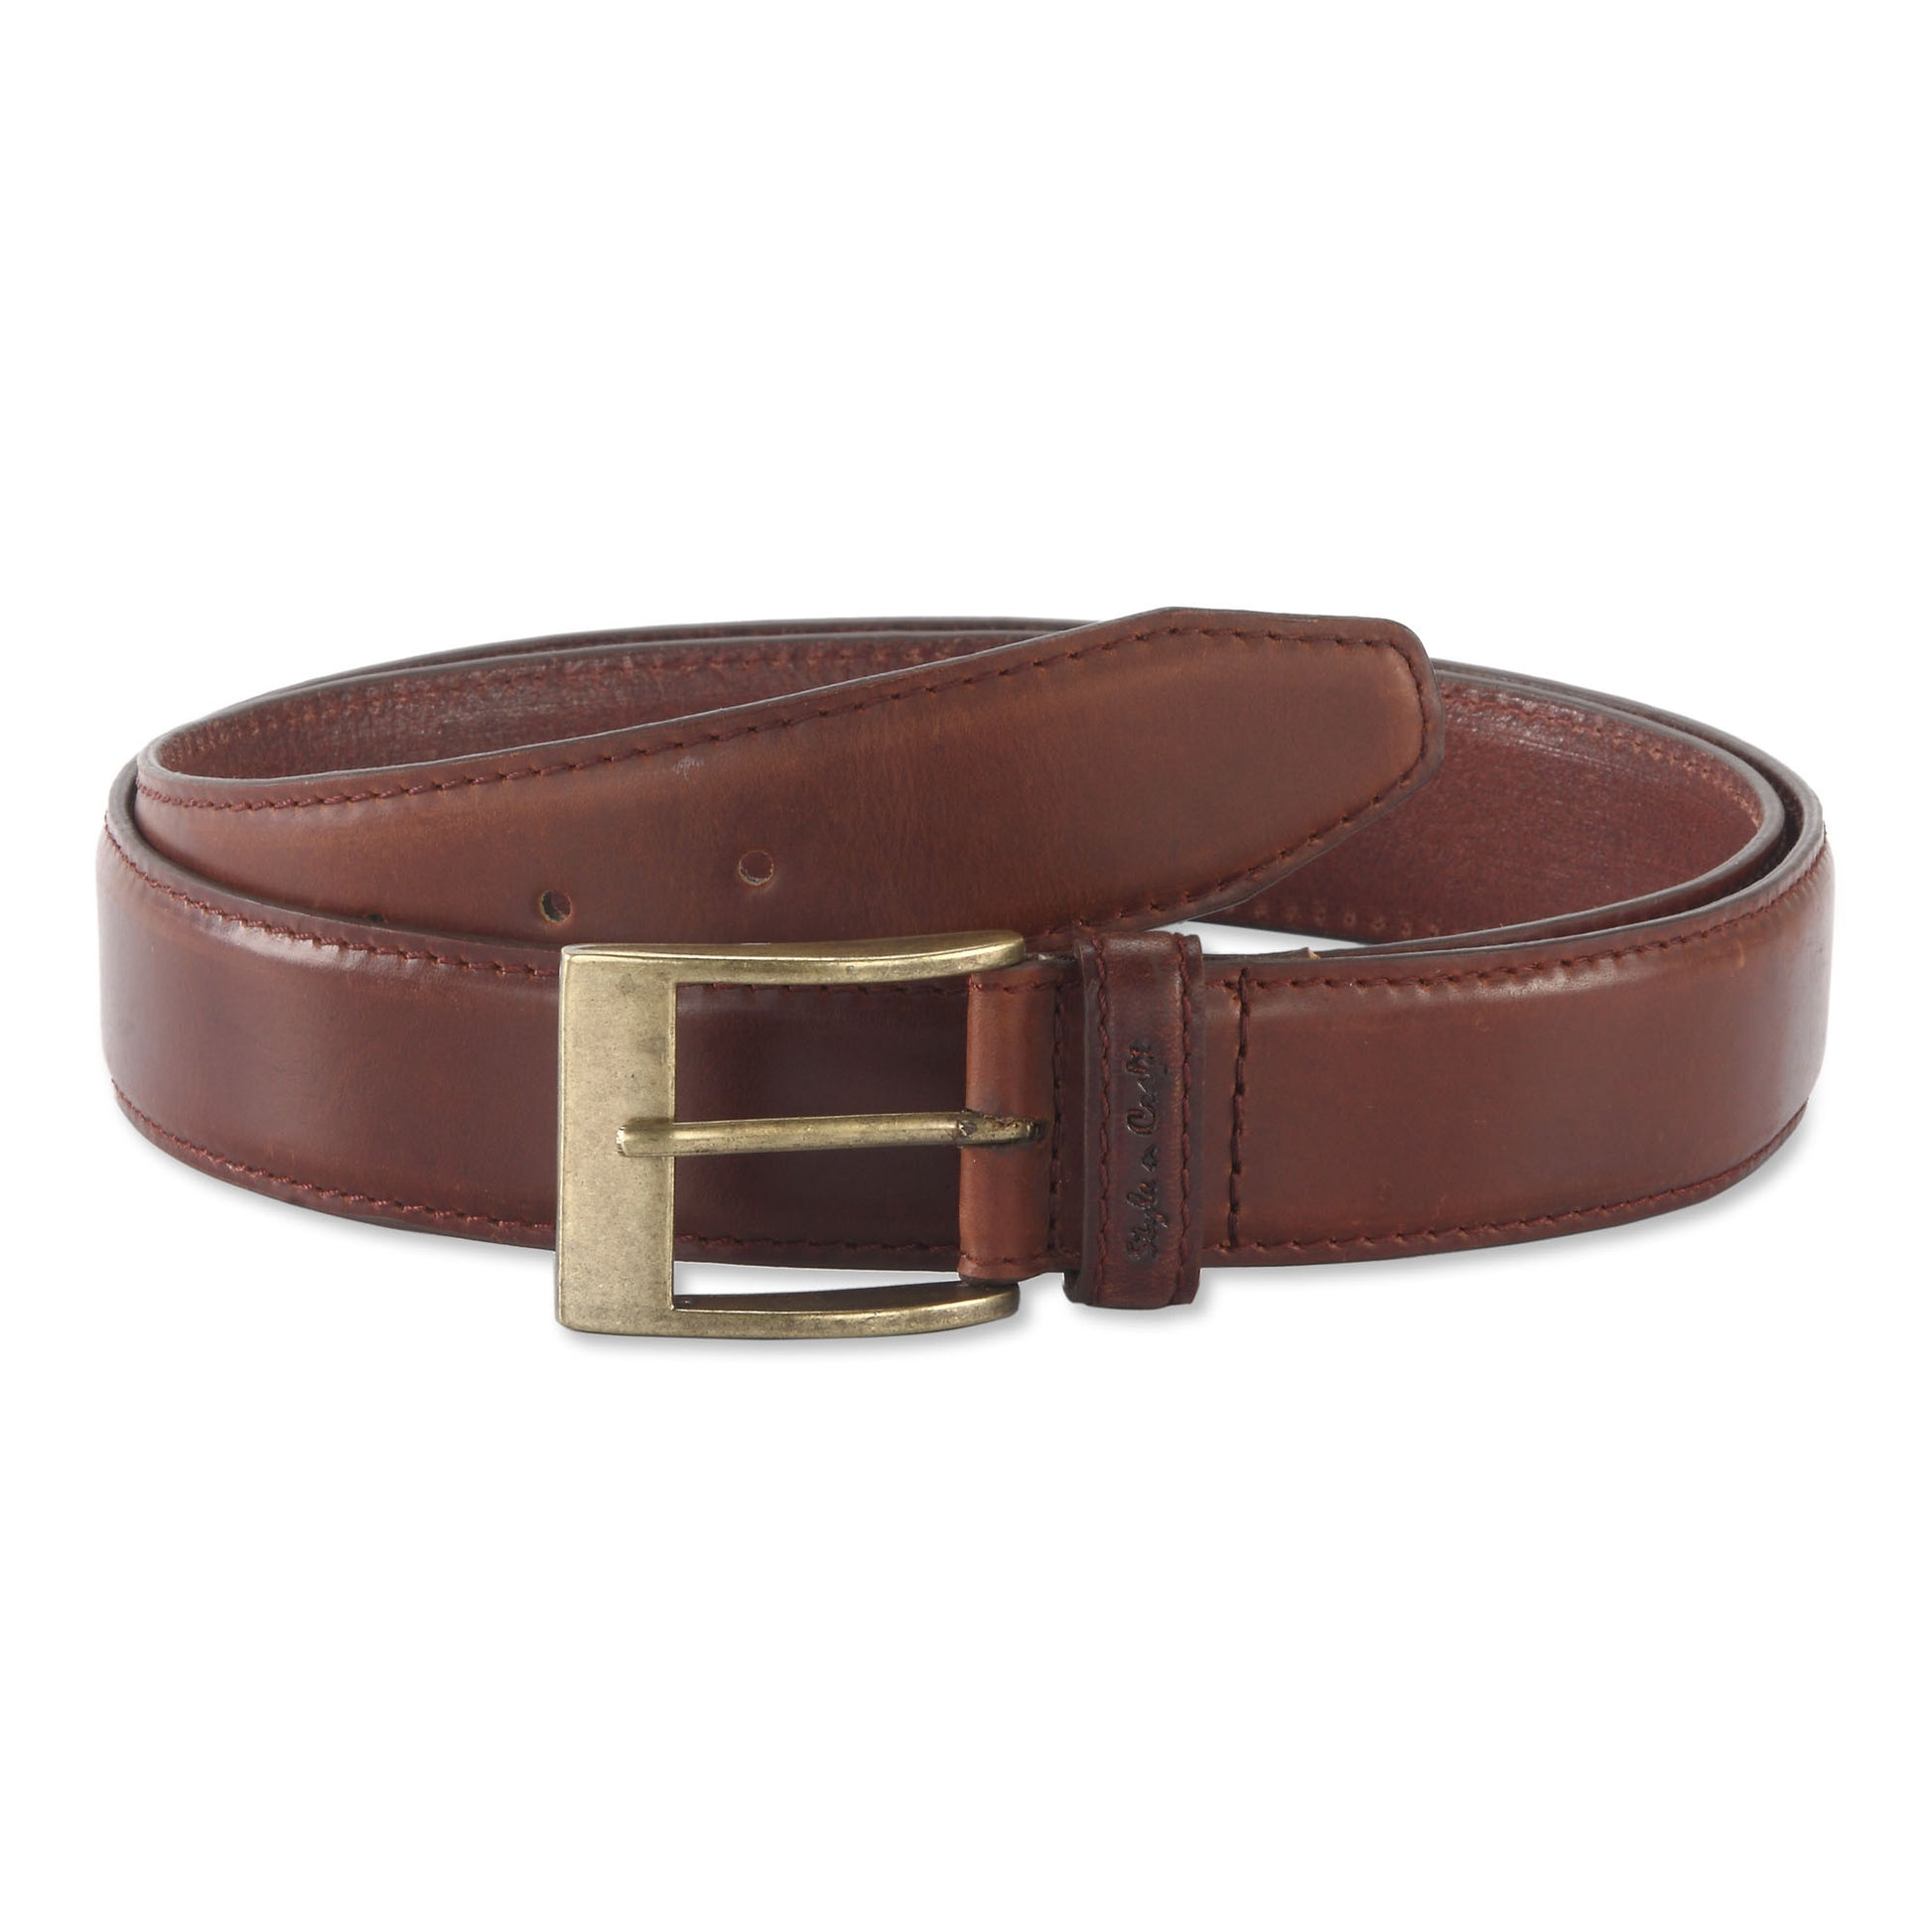 391903 - one and a half inch wide leather belt in brandy color top grain leather - front view